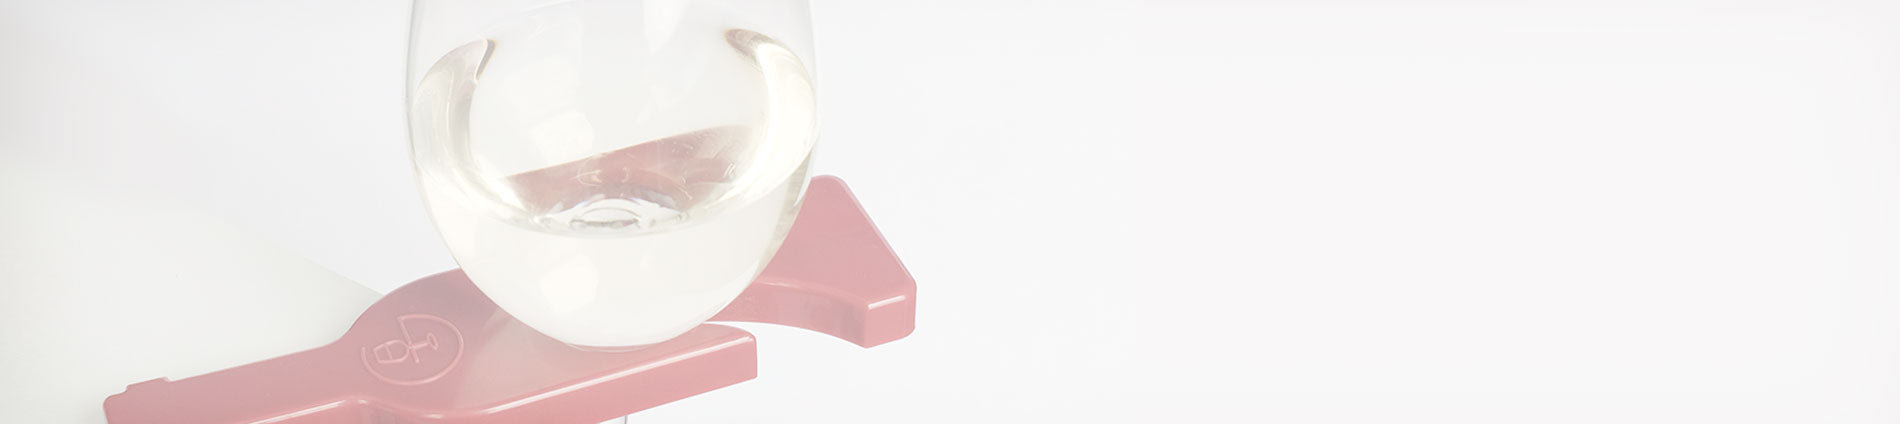 a close up of a red wineGrasp gadget holding a glass of white wine on a white background